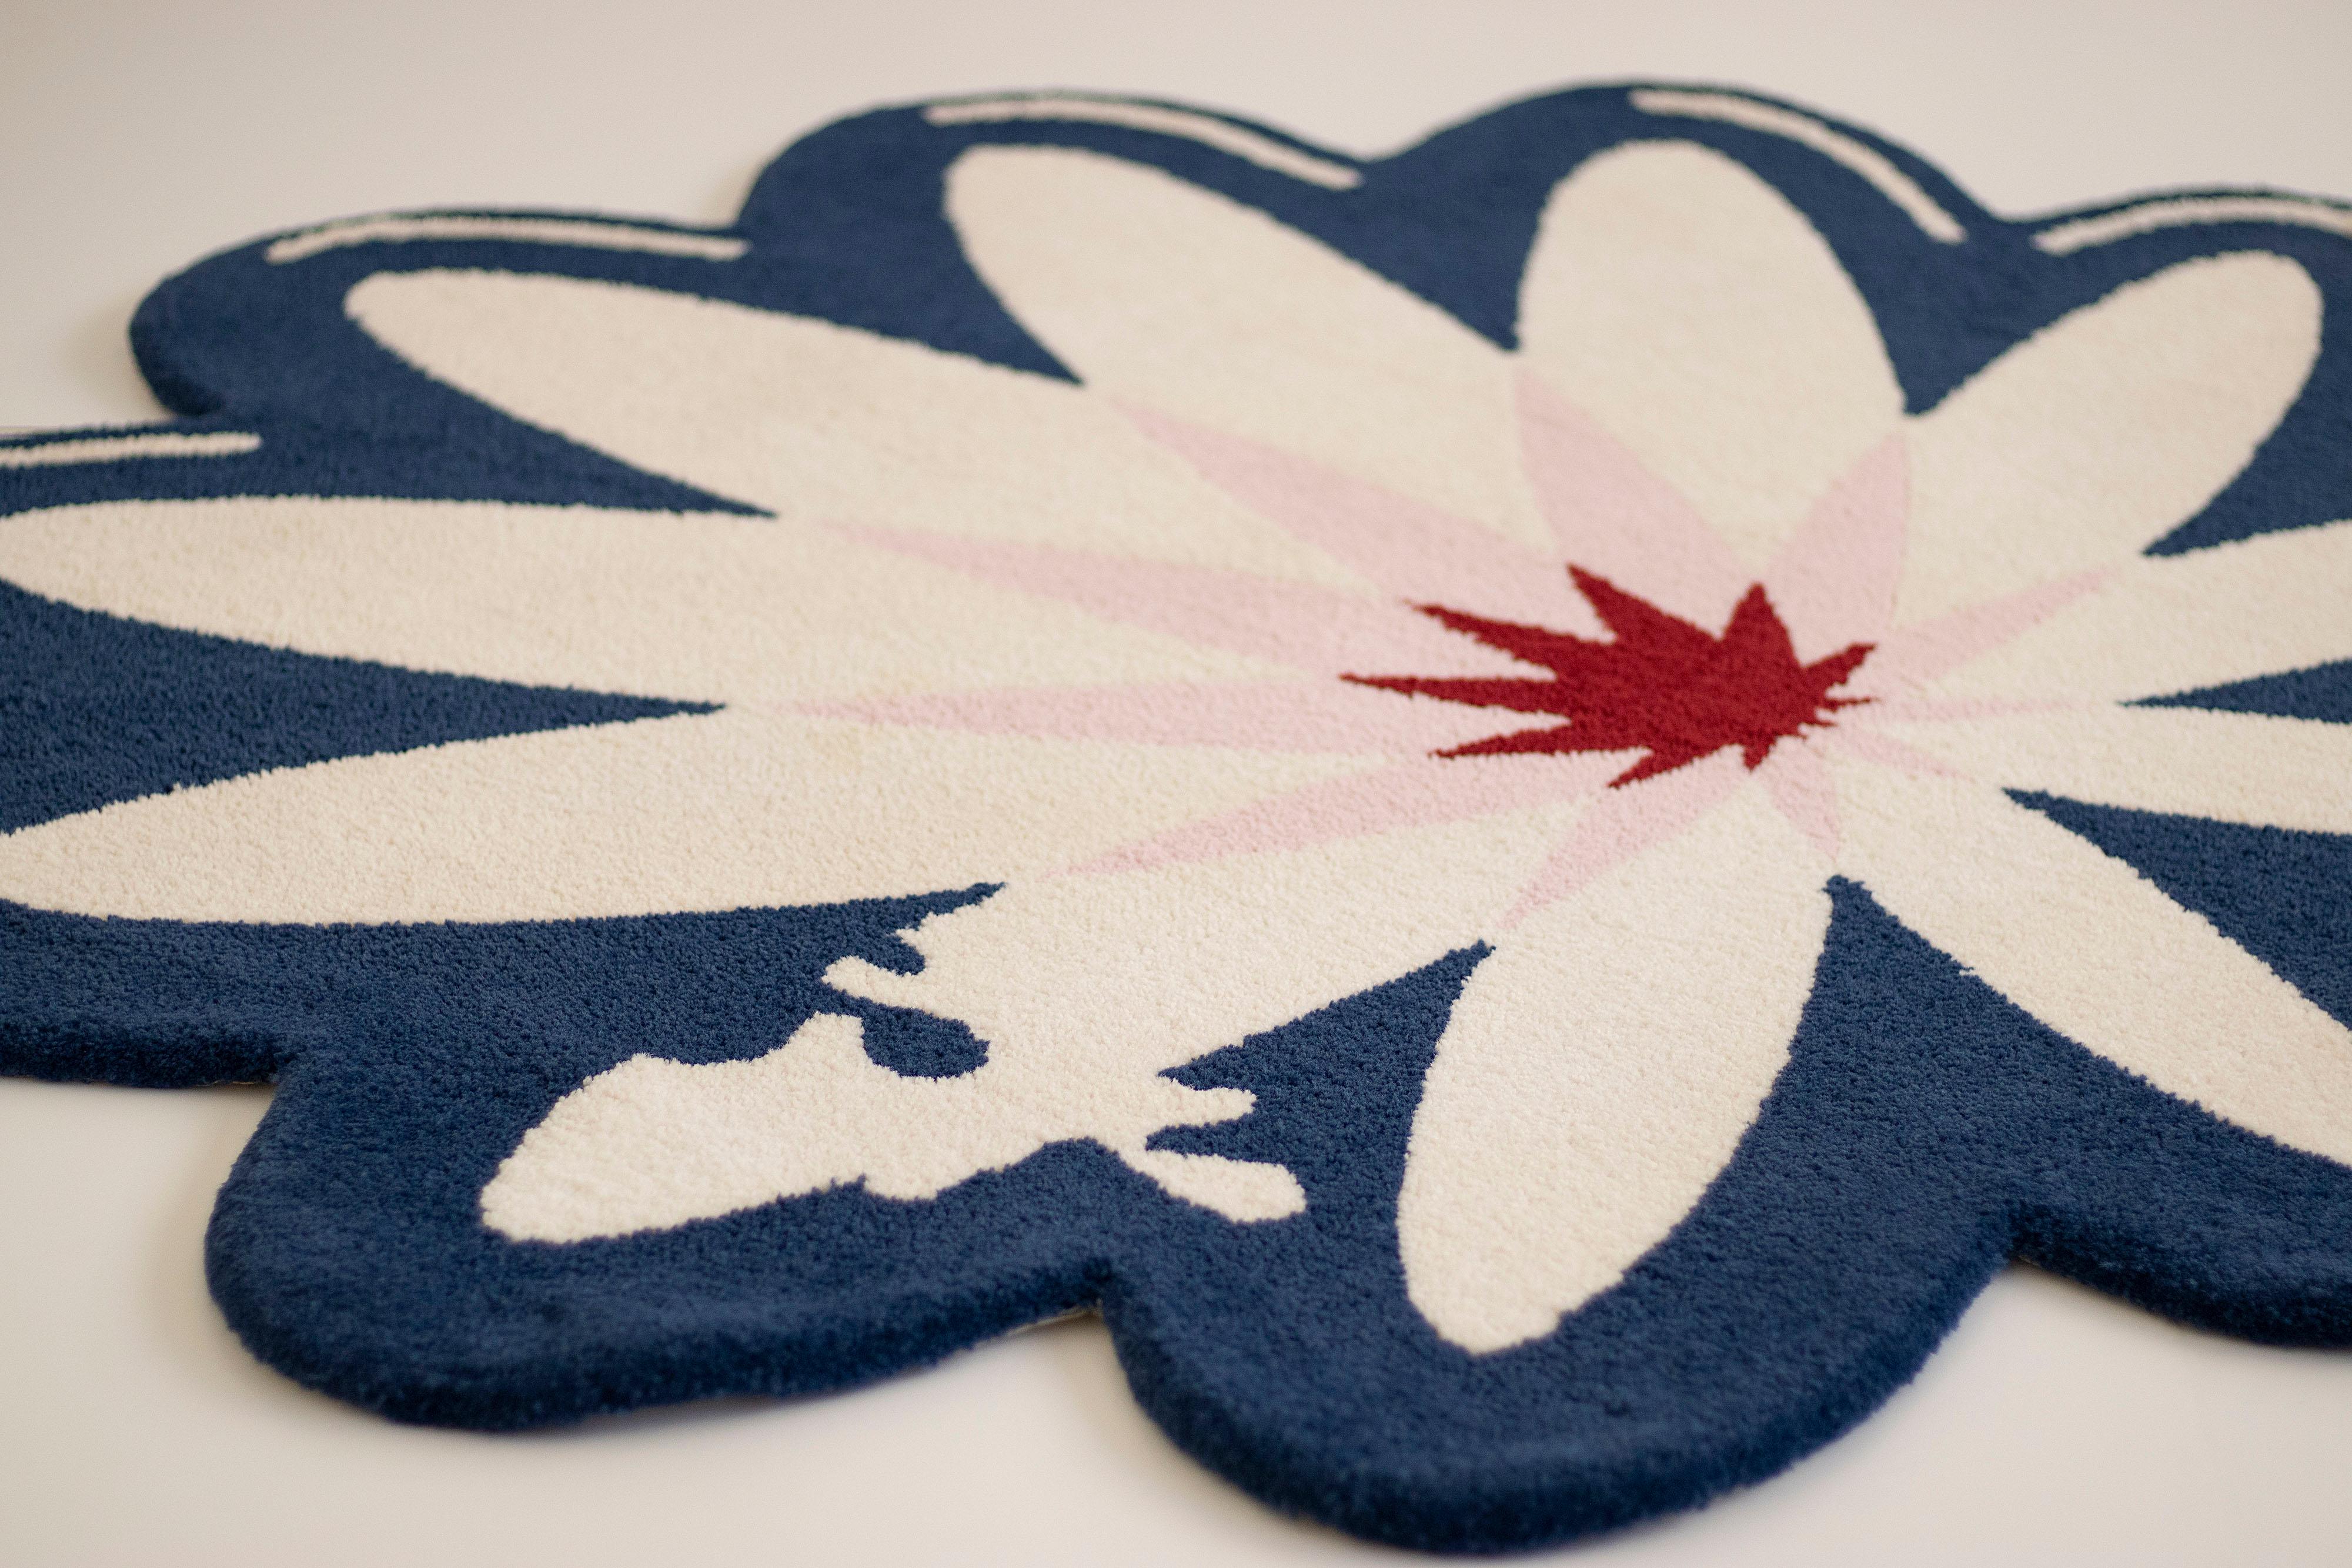 Round Blue, White & Red Flower Rug from Graffiti Collection by Paulo Kobylka For Sale 3